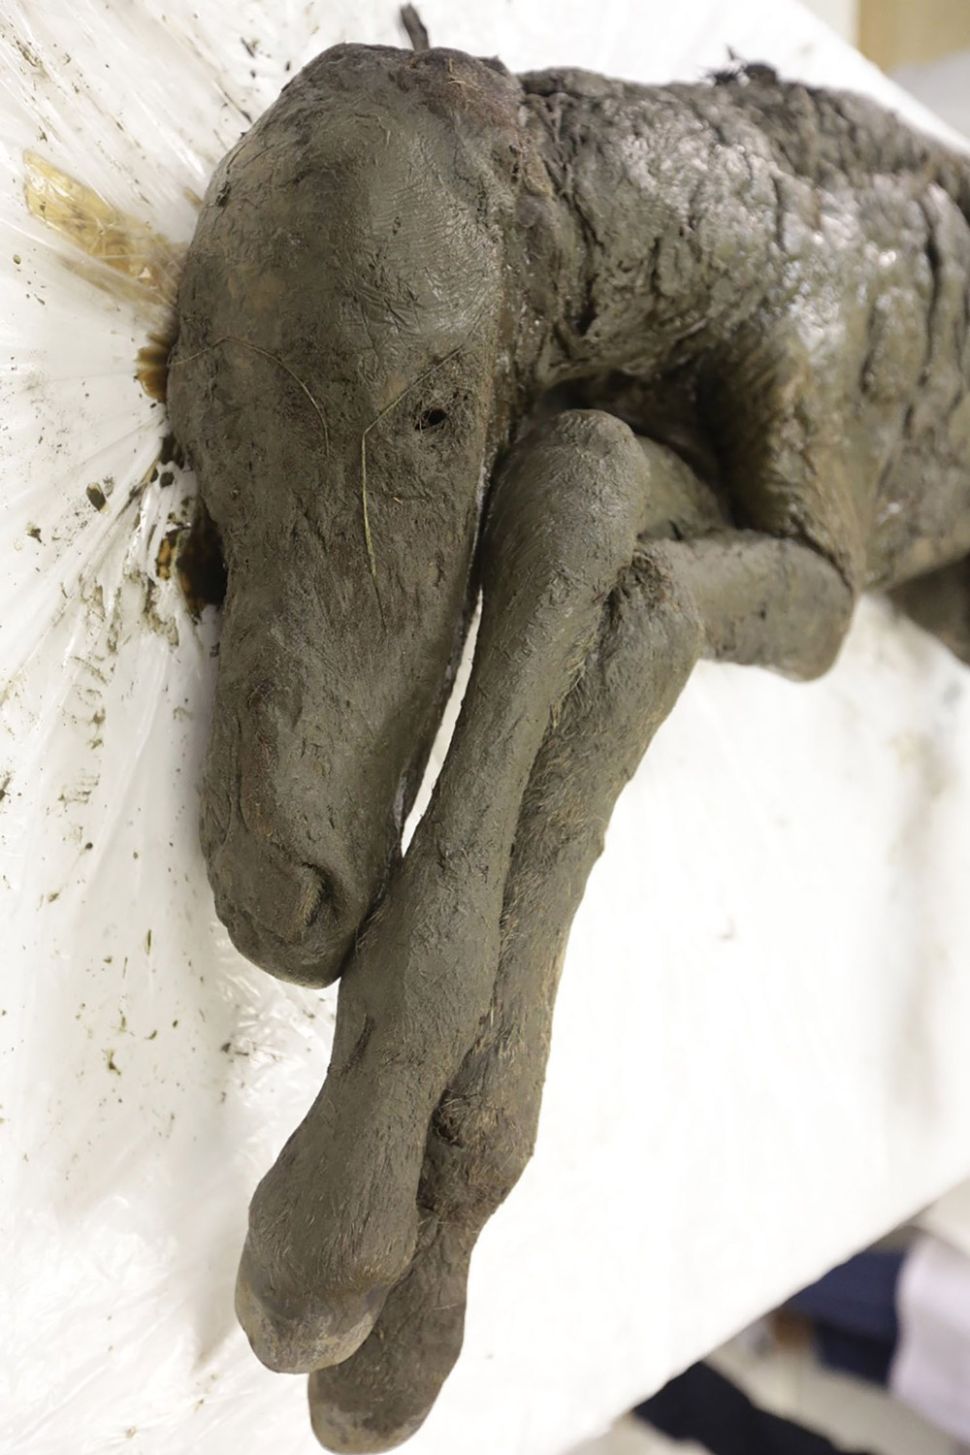 Skin, hair and soft tissue of the ancient foal have remained intact for more than 30,000 years.